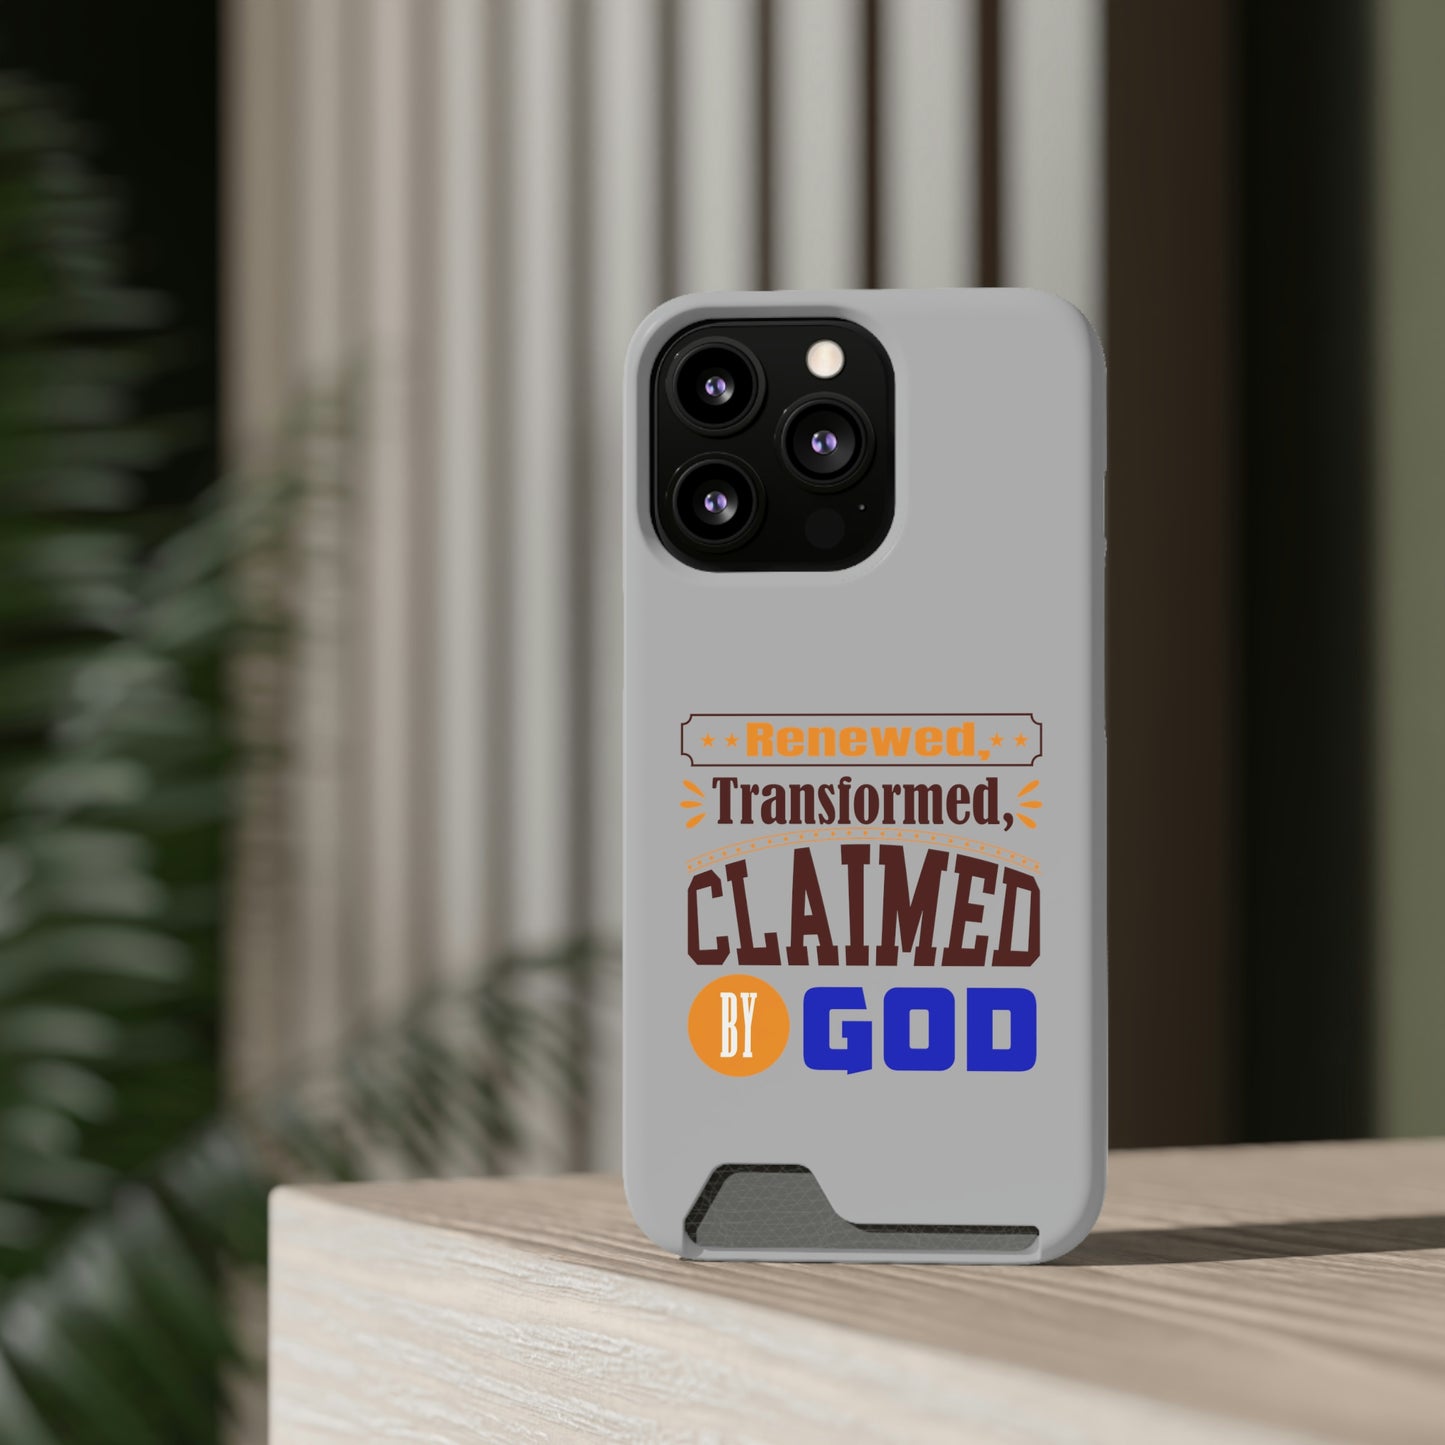 Renewed, Transformed, Claimed By God Phone Case With Card Holder